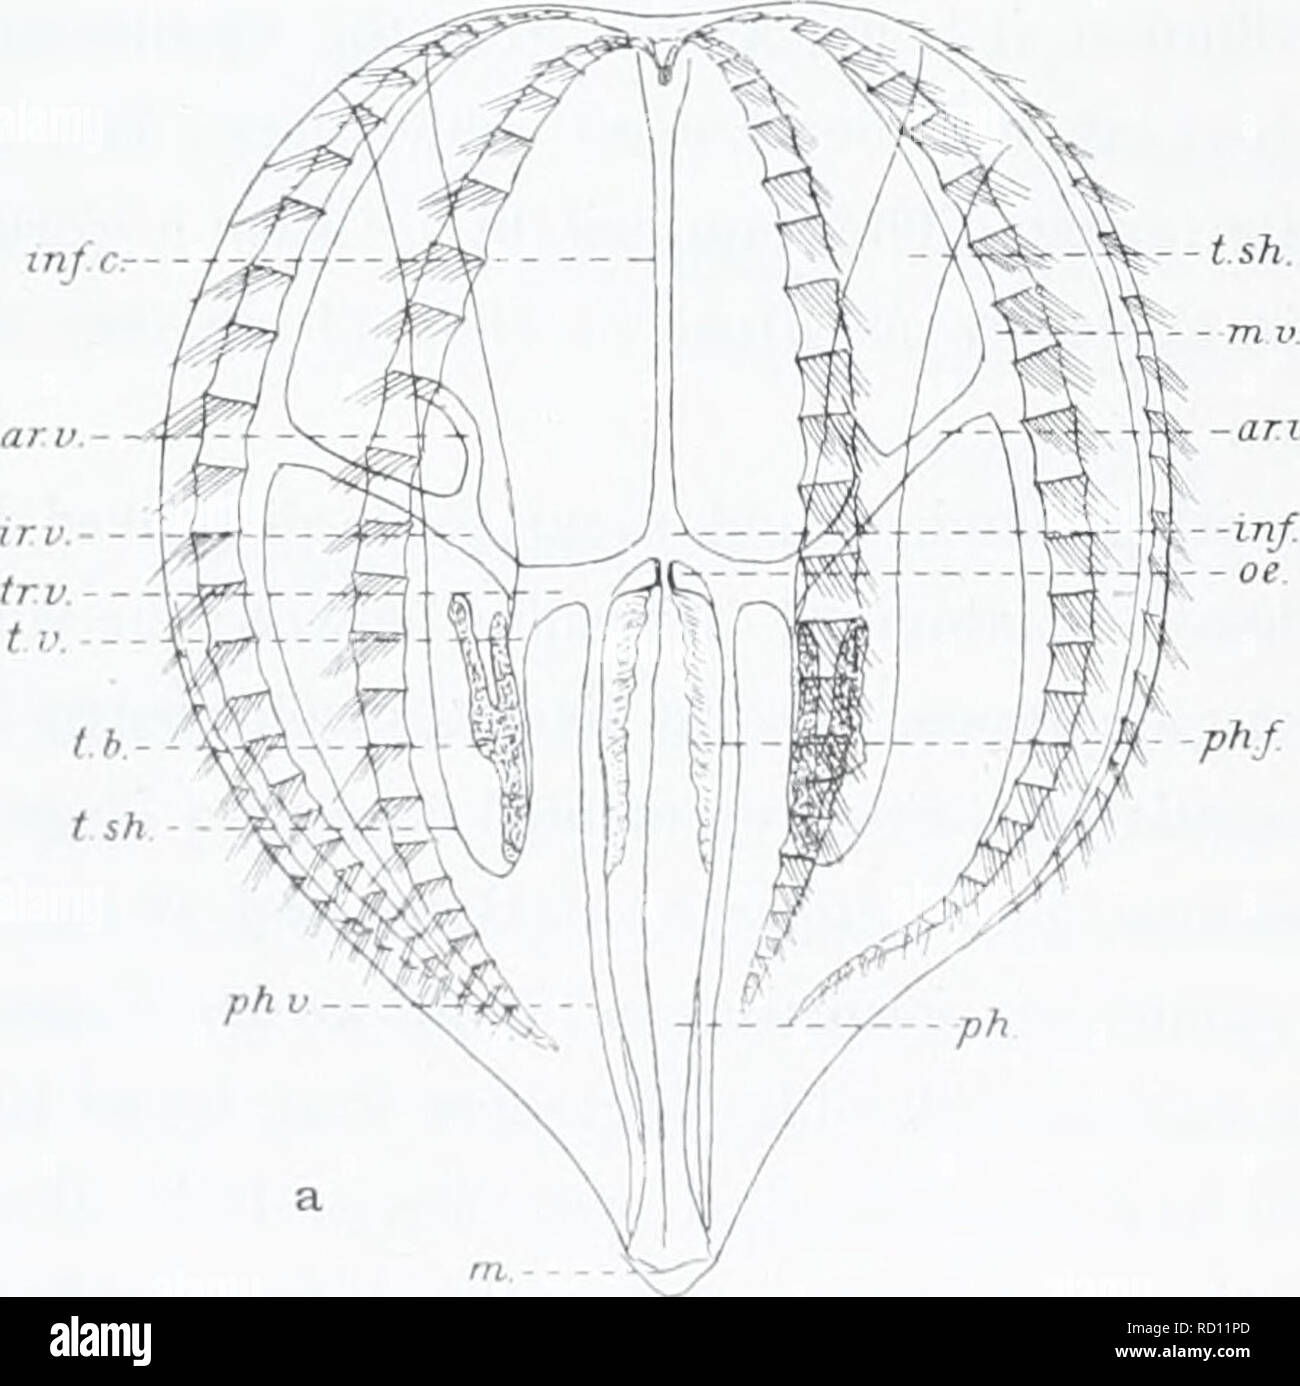 . The Danish Ingolf-expedition. Marine animals -- Arctic regions; Scientific expeditions; Arctic regions. 70 CTENOPHORA. observations is doubtless this, that his supposed specimens of PI. rhodopis are not this form at all, but most probably belong to some species of Lobatae. This suggestion is supported by the fact, that in Garbe's material of young Pleurobrachia from Helgoland were found a pair of specimens showing essentially the same structure of the gastrovascular system as his &quot;Pl.rhodopis&quot; from Triest. Now it can be said with rather great certainty, that these latter young Cten Stock Photo